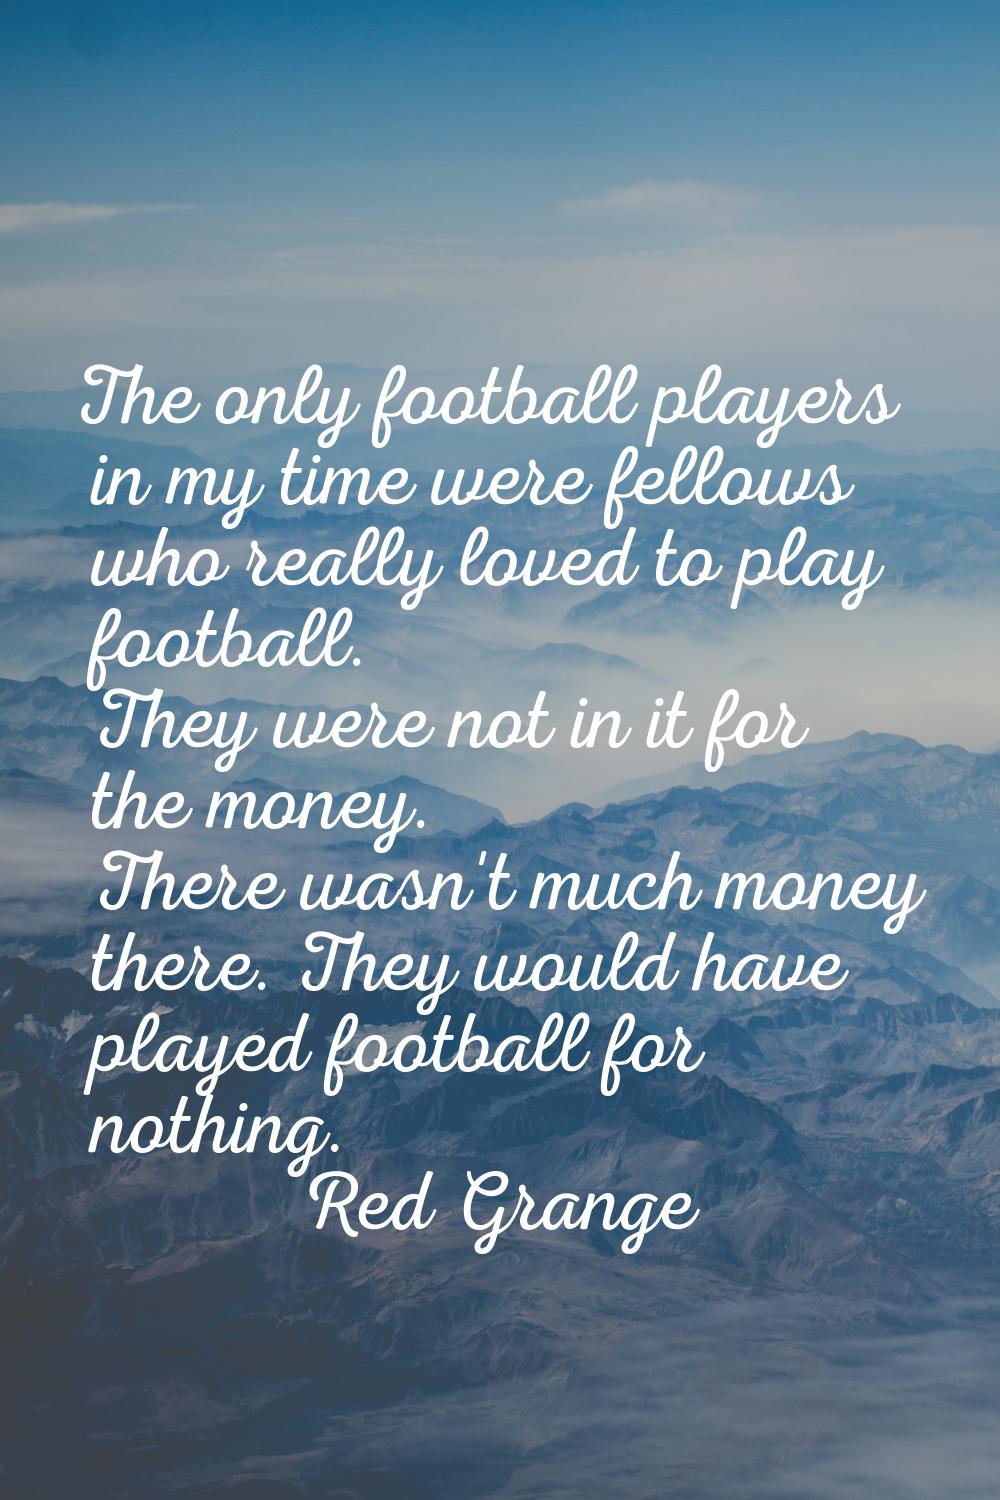 The only football players in my time were fellows who really loved to play football. They were not 